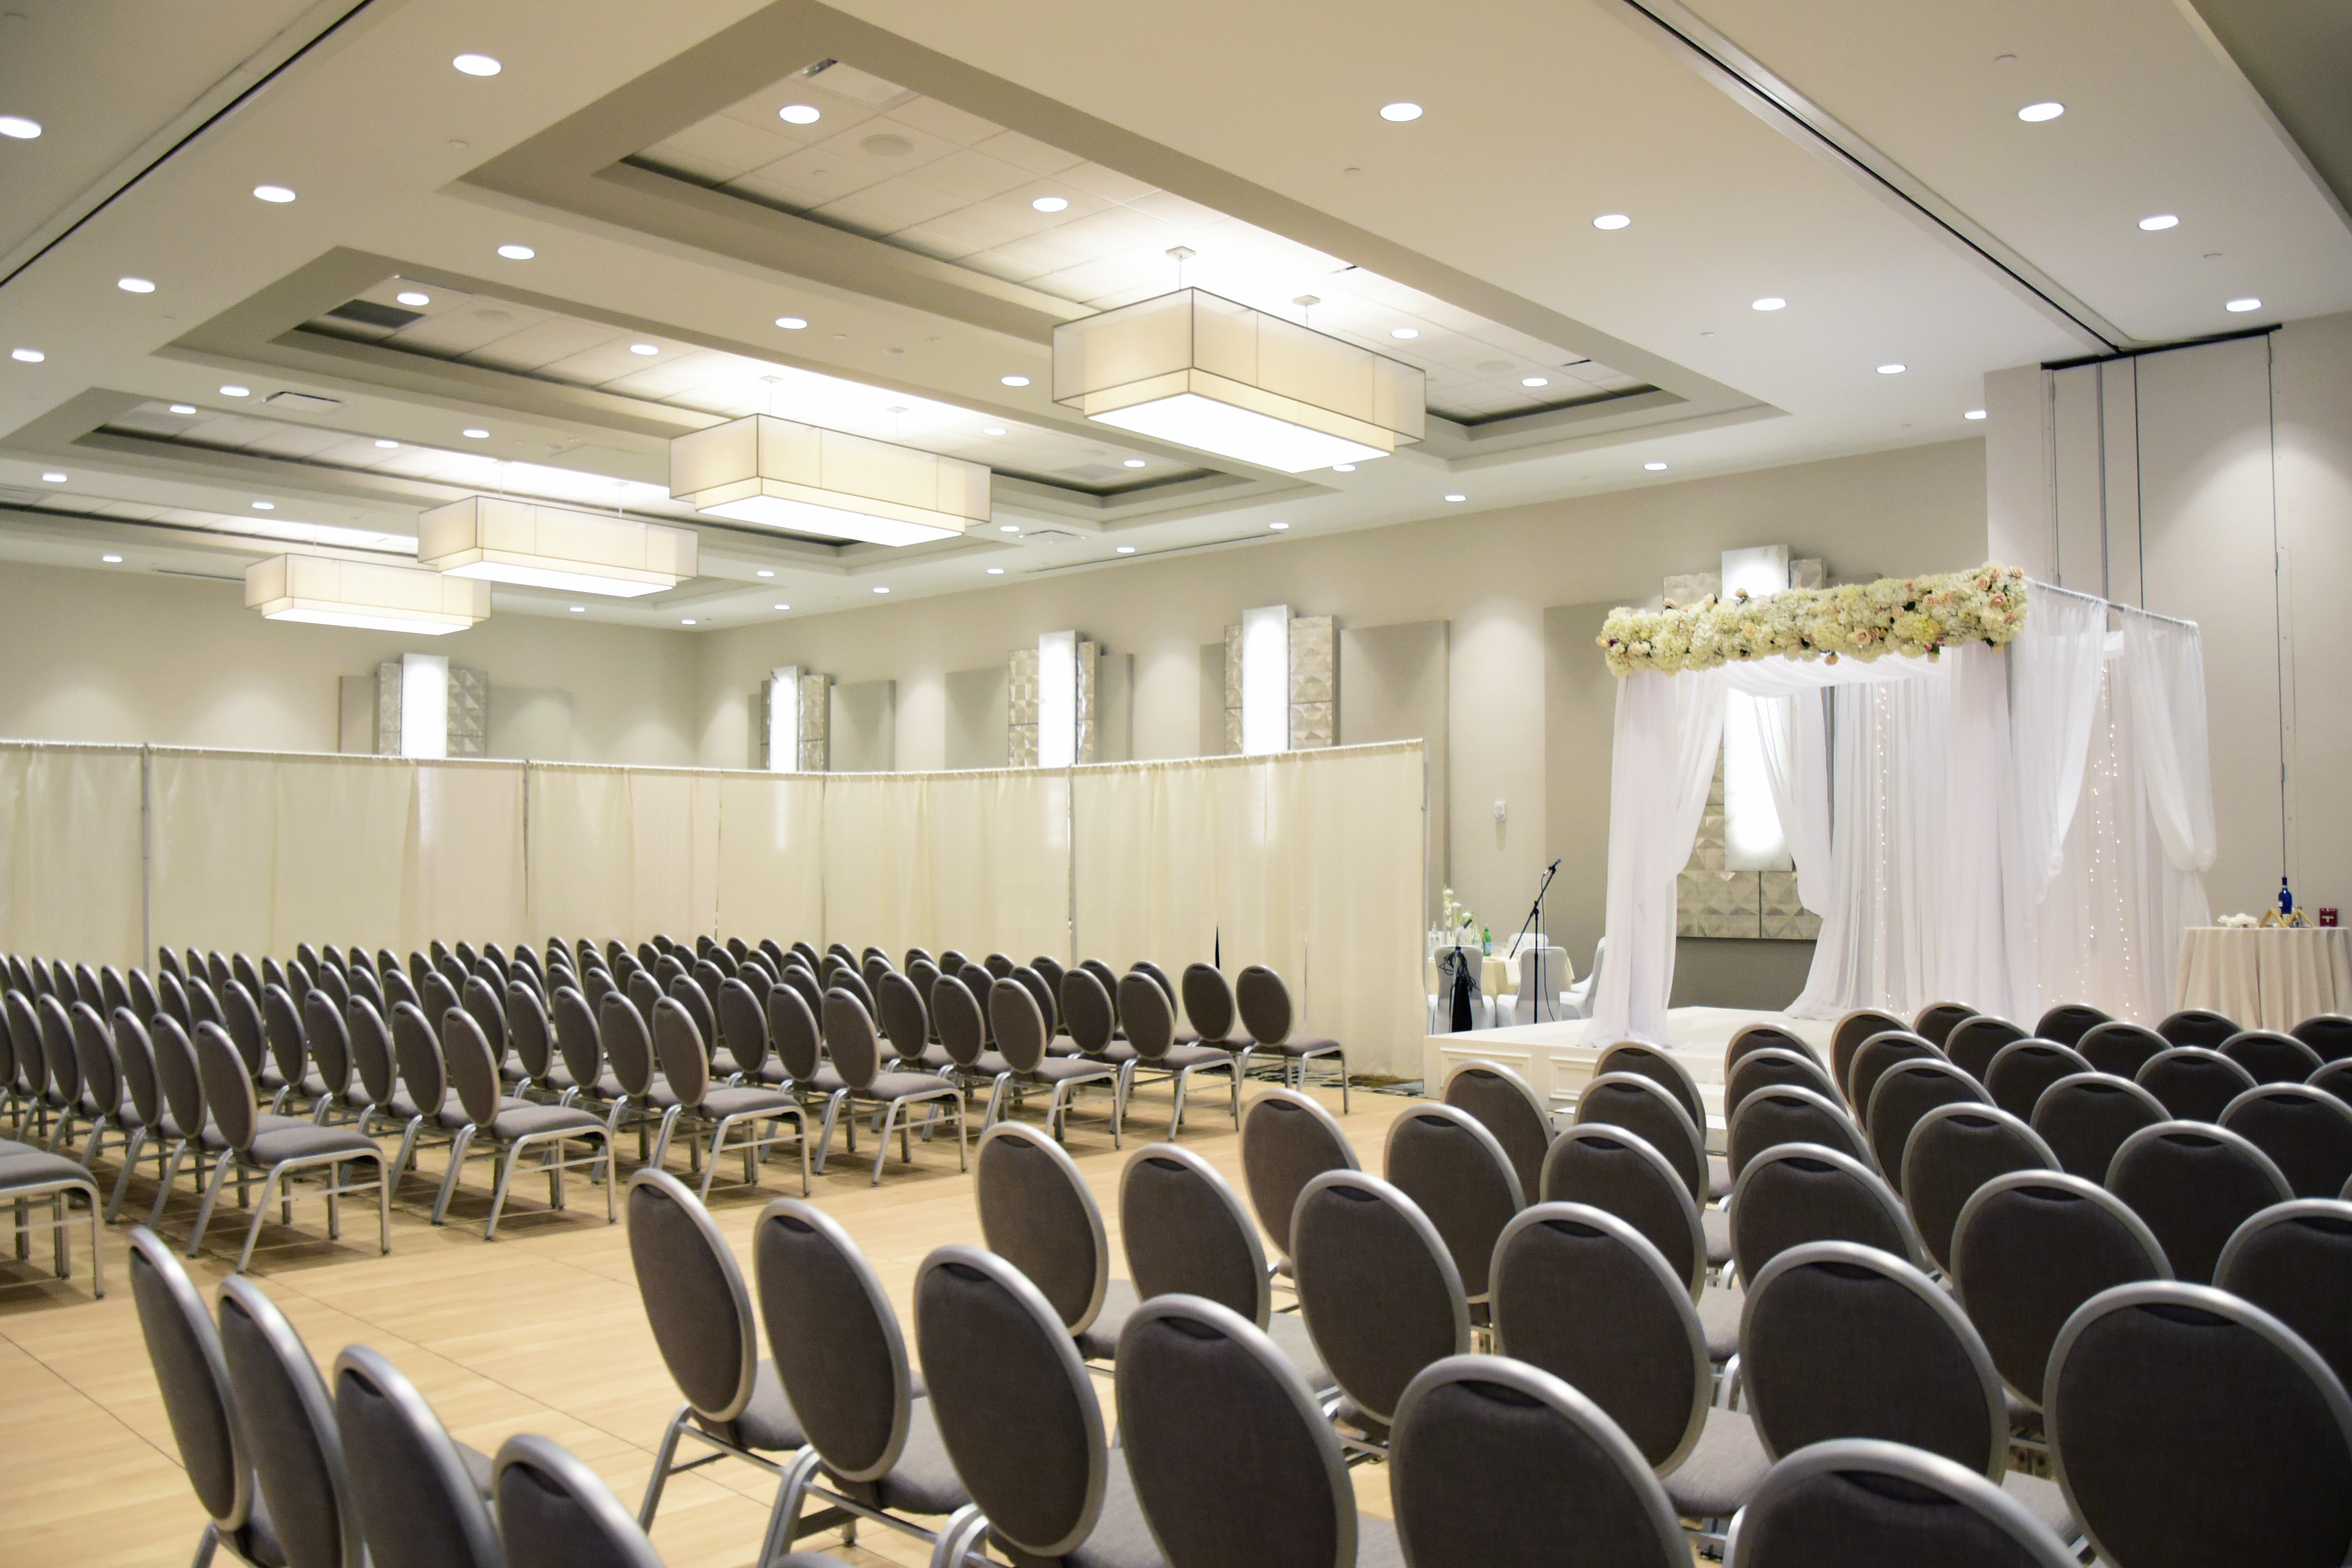 Preakness Ballroom Setup in Theater Style to Celebrate a Wedding